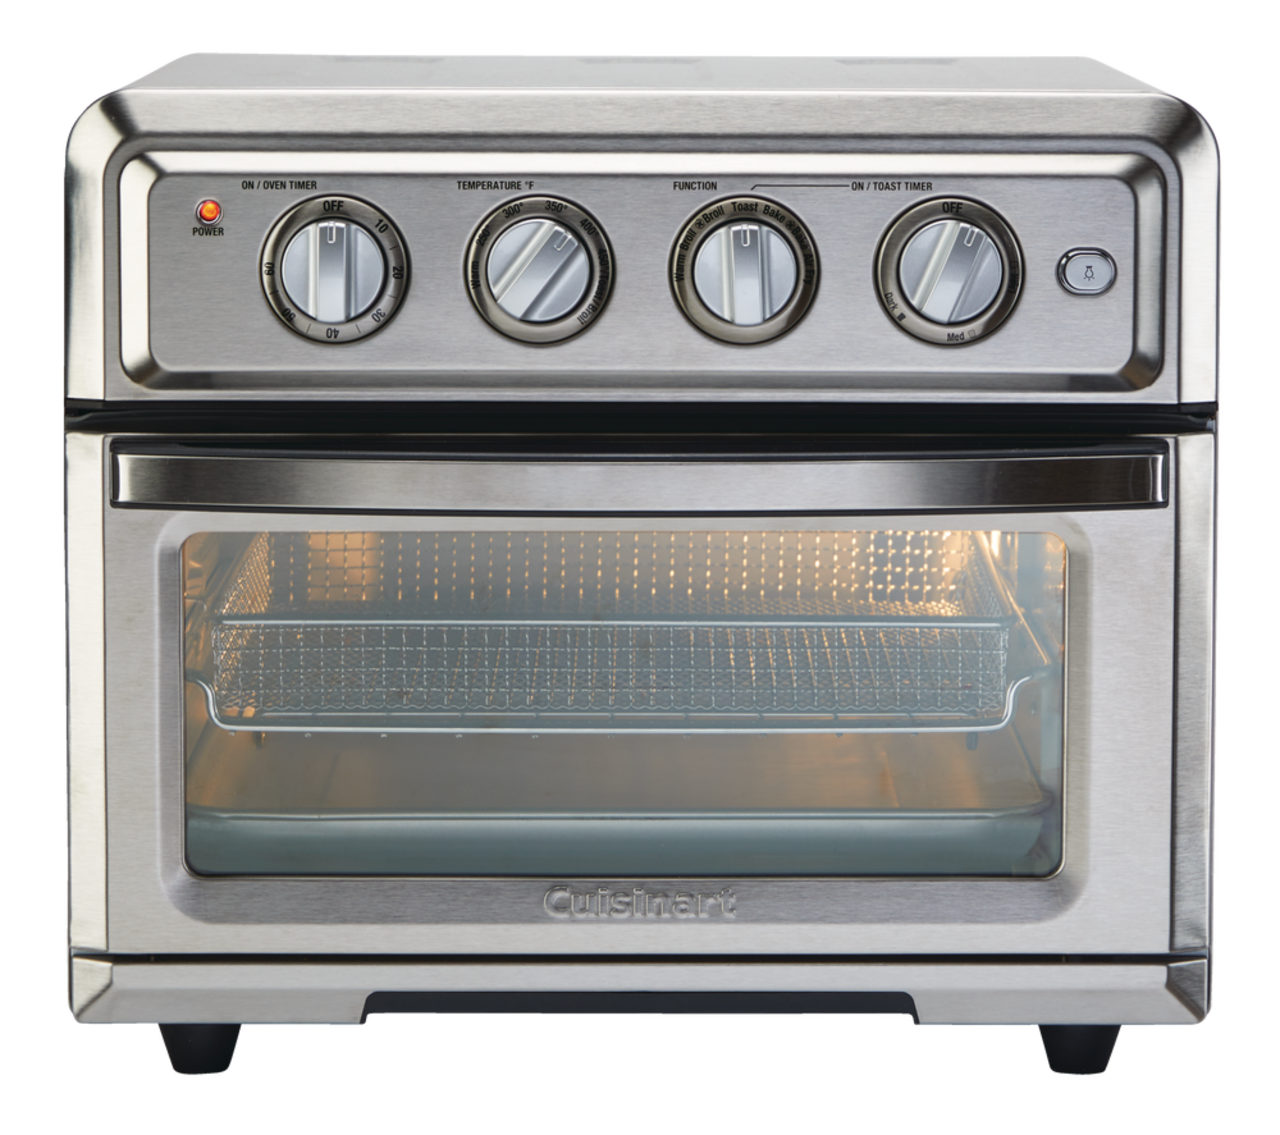 https://media-www.canadiantire.ca/product/living/kitchen/kitchen-appliances/0439587/cuisinart-air-fry-toaster-oven-71bf0537-0fce-42eb-8fa5-9498d2b077c4.png?imdensity=1&imwidth=640&impolicy=mZoom